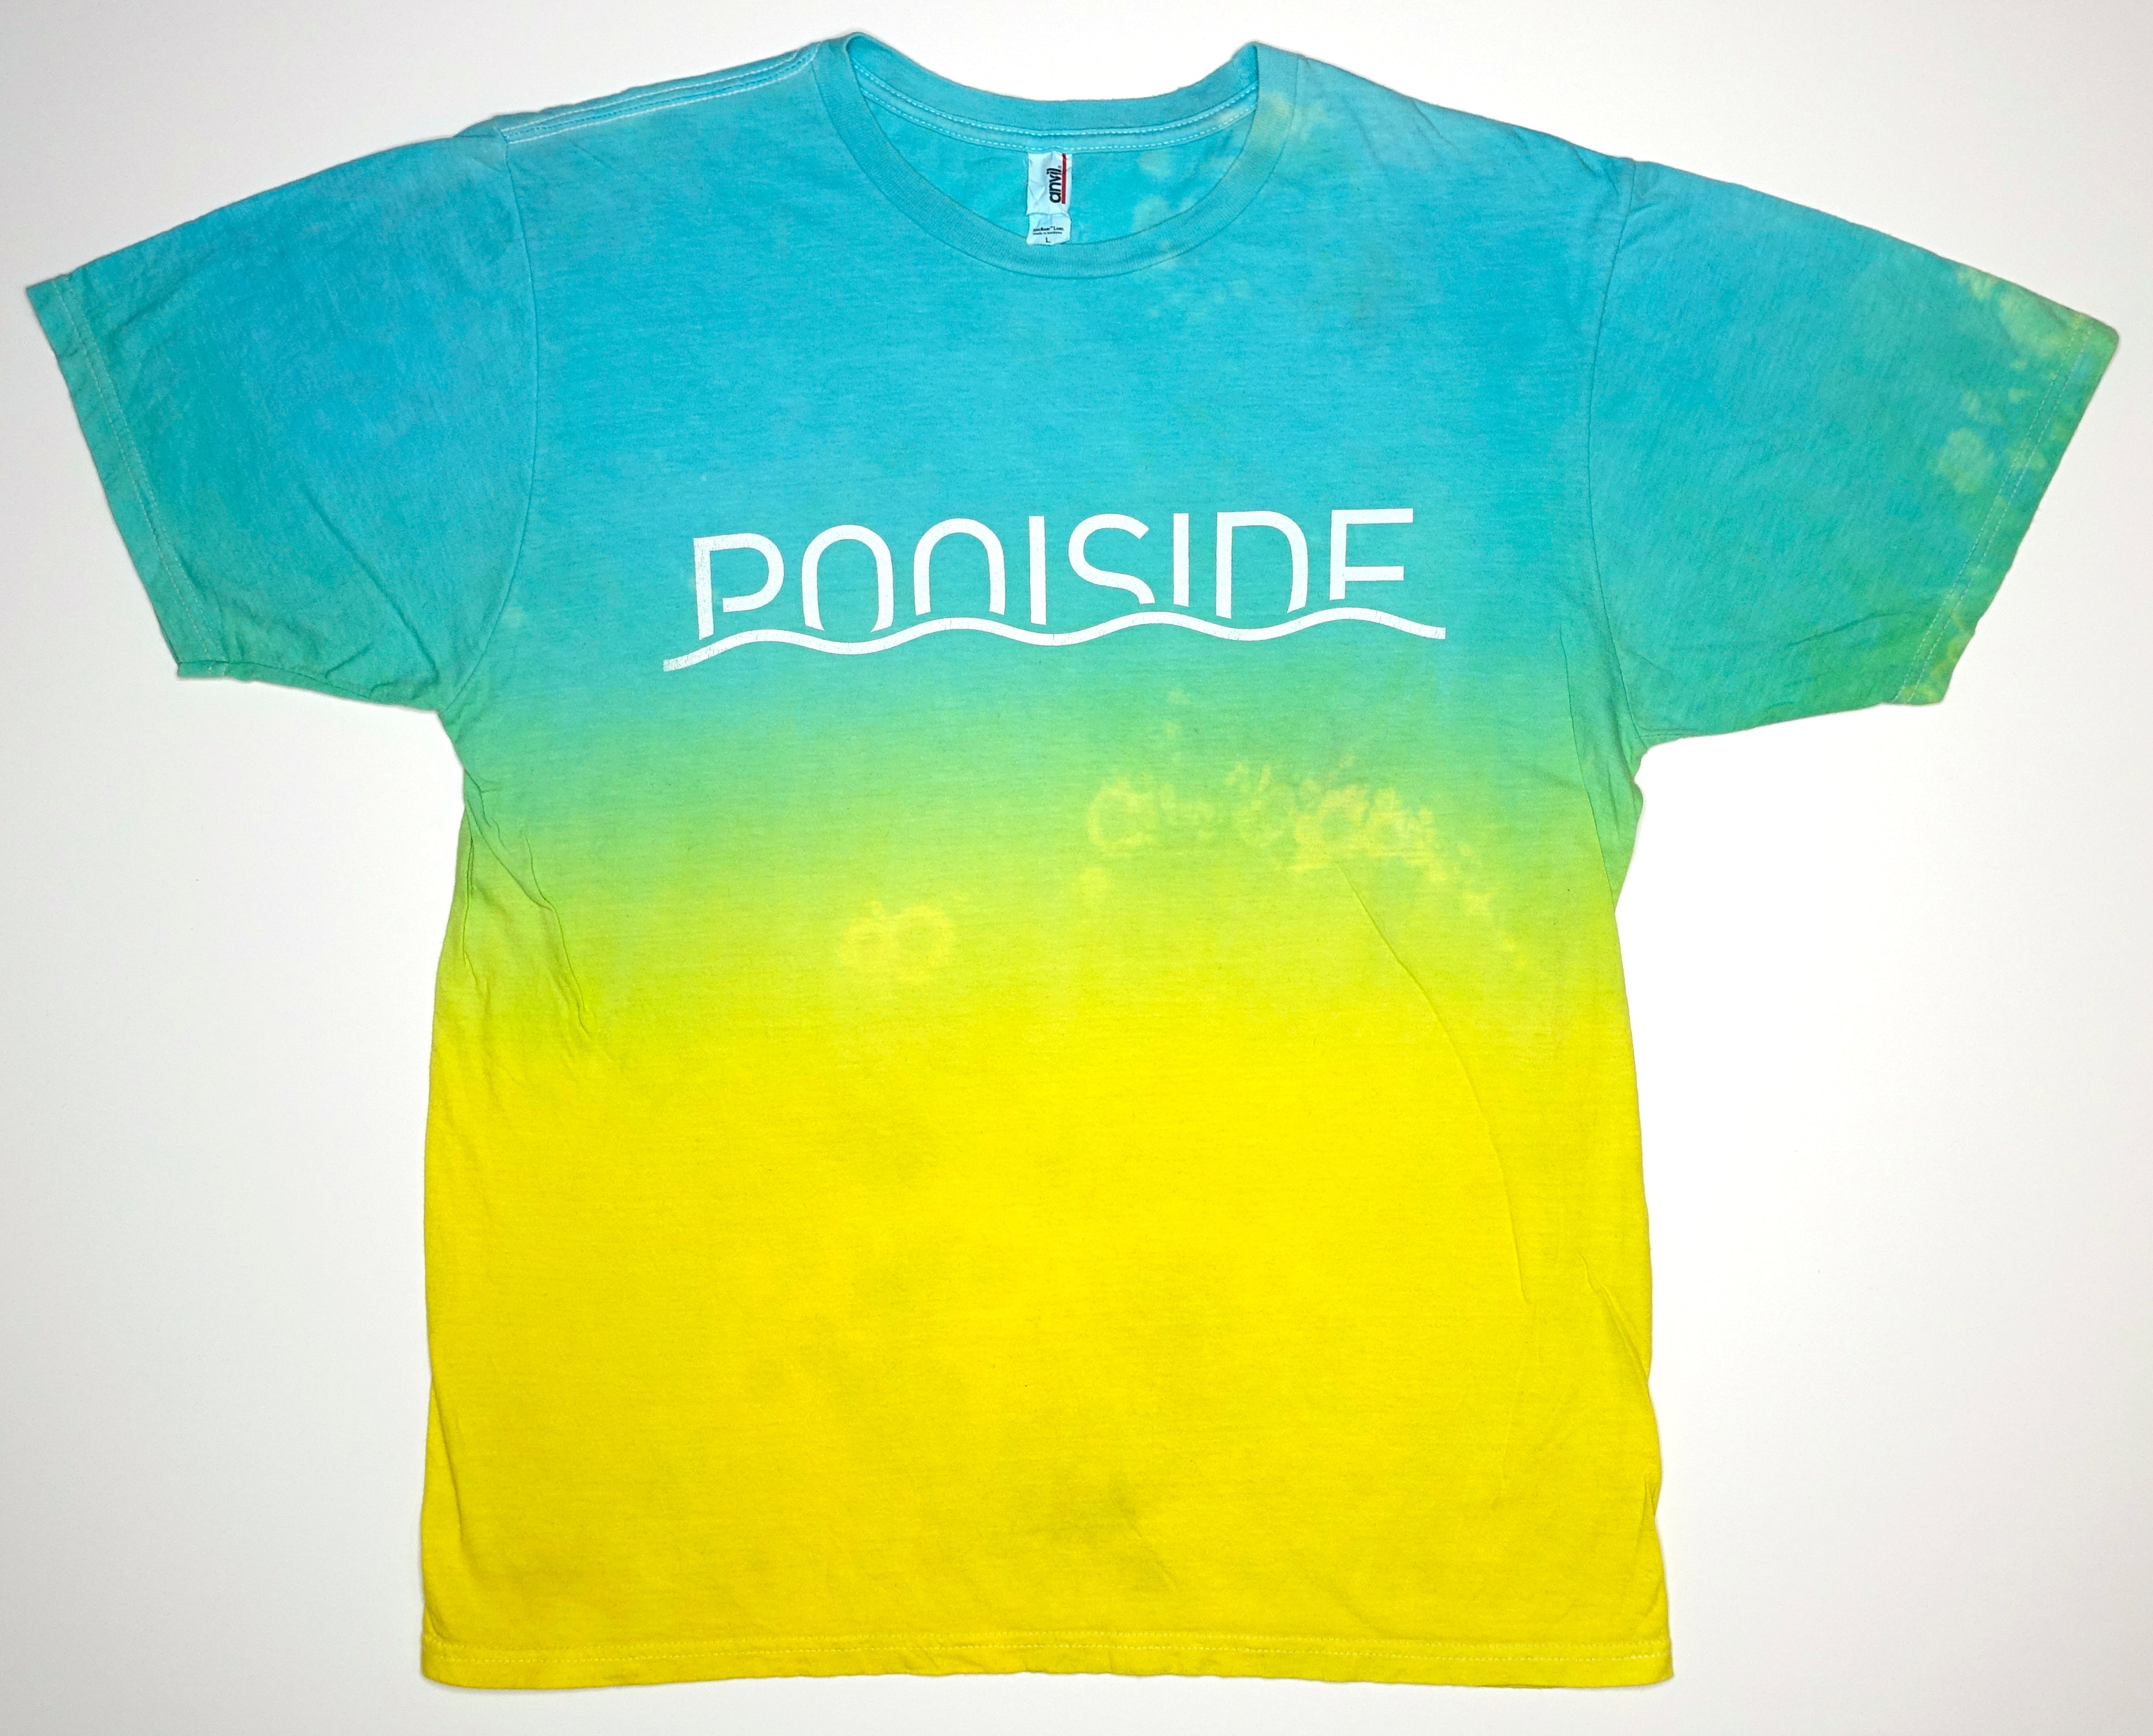 Poolside ‎– Pacific Standard Time 2012 Tour Shirt Size Large